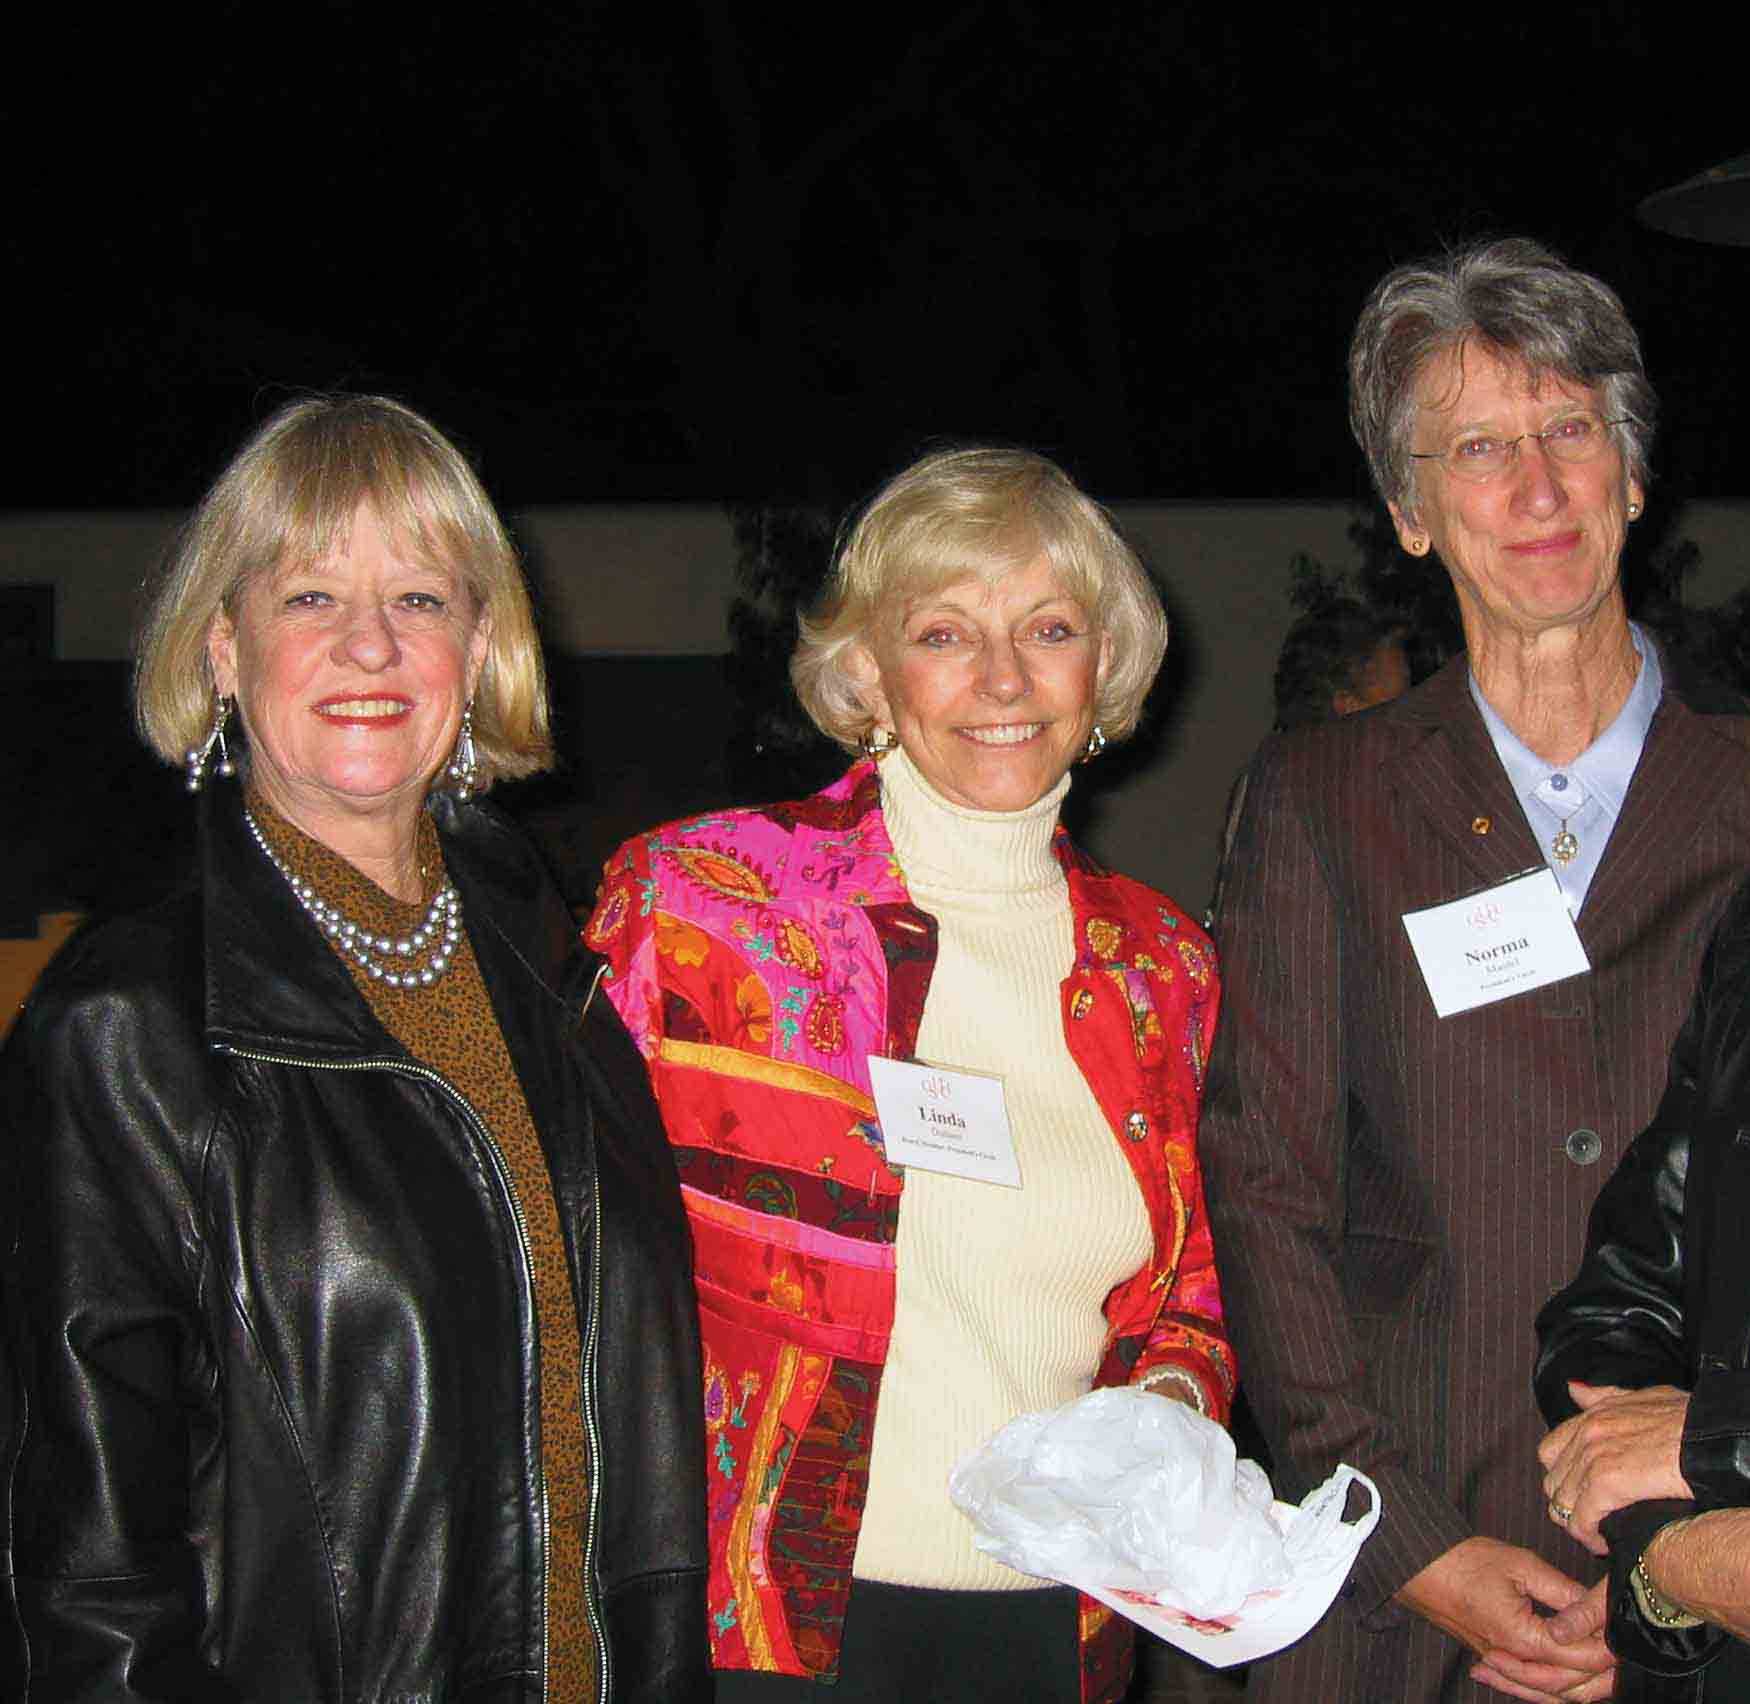 President’s Circle members Patty McMillan, Linda Dullam and Norma Maidel pose at an event in the early 2000s.